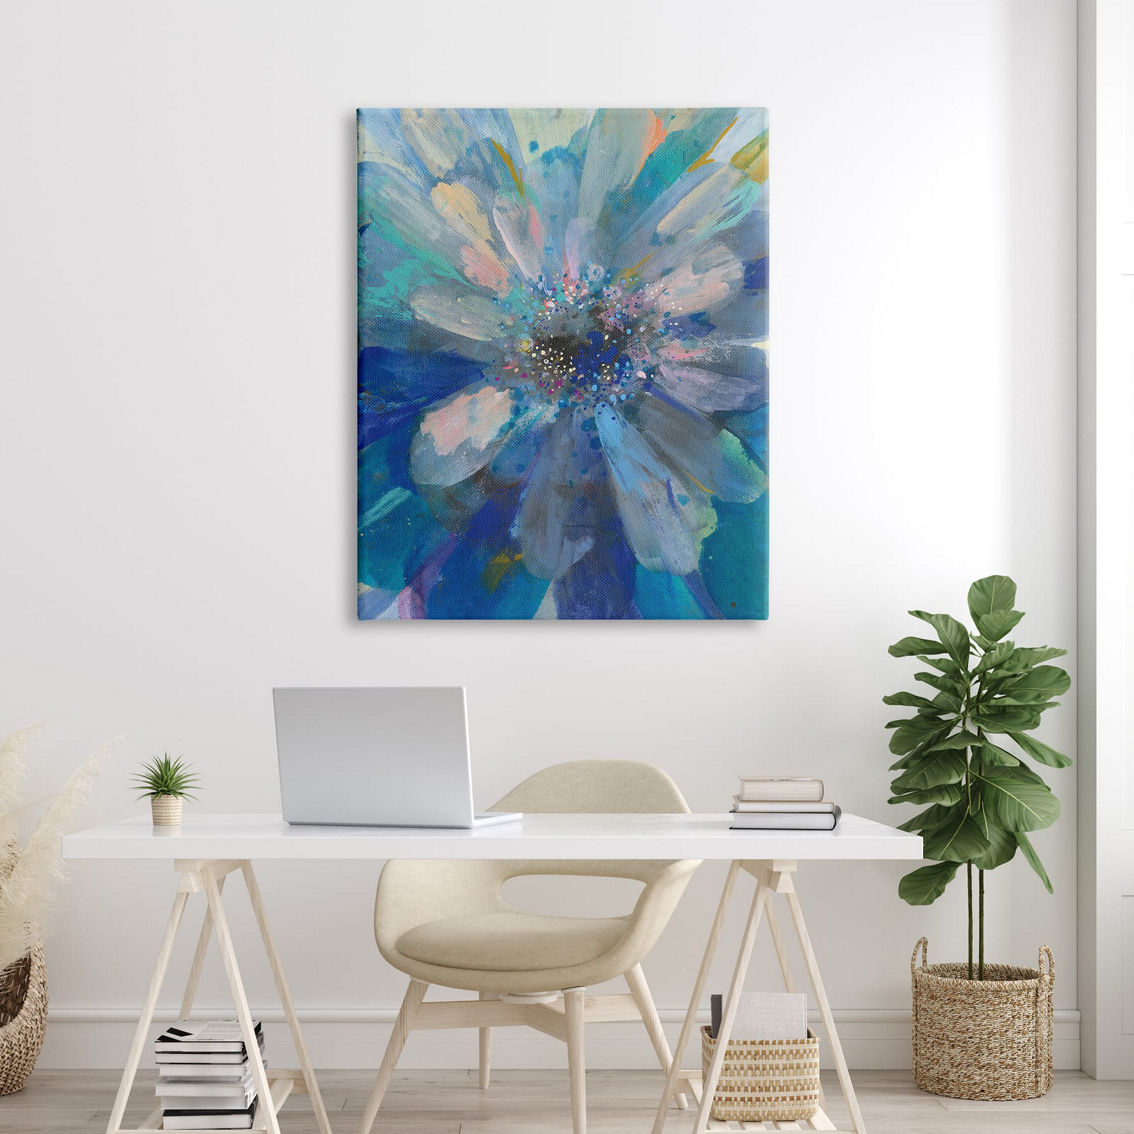 Stupell Canvas Abstract Blue Floral Petals, 36x48 - Image 2 of 5